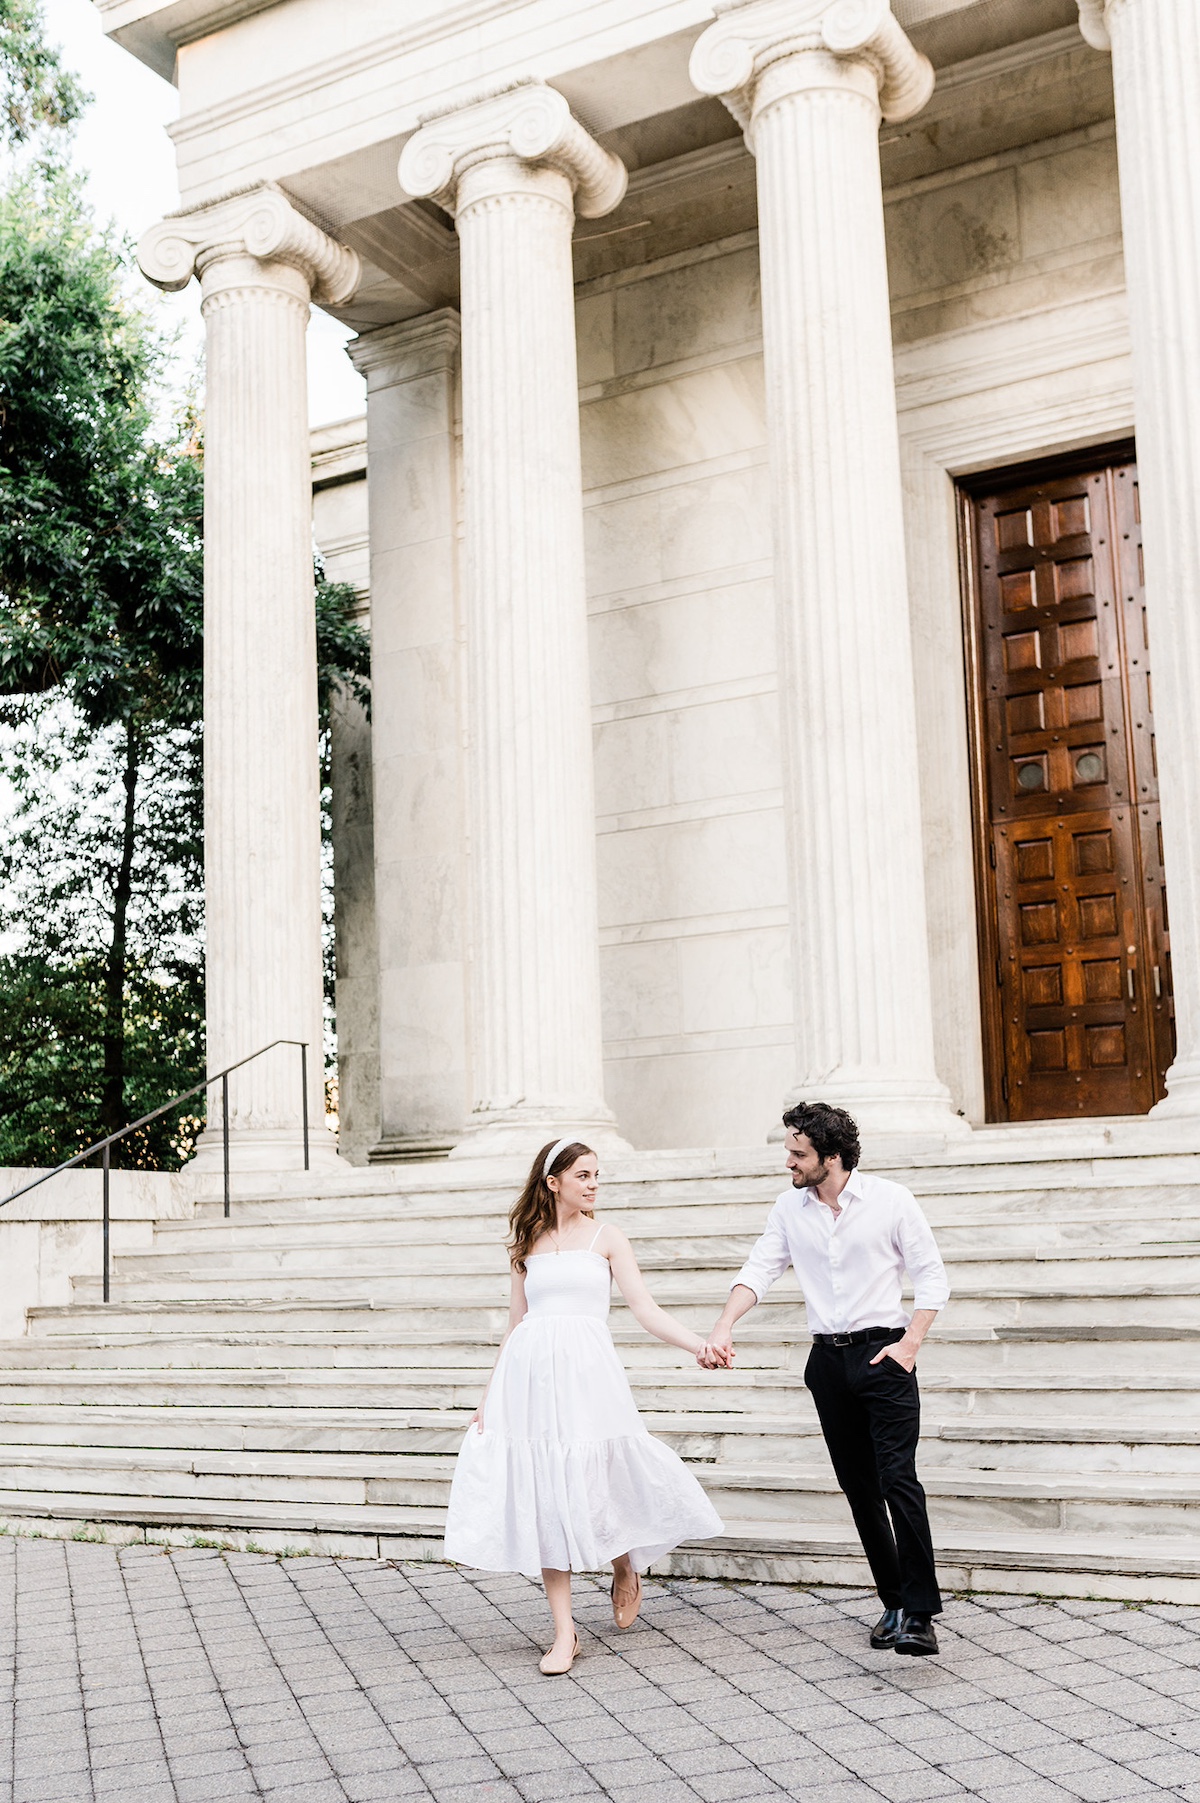 Sun-kissed love: Page and Christopher's laughter echoing through Princeton's historic corridors.